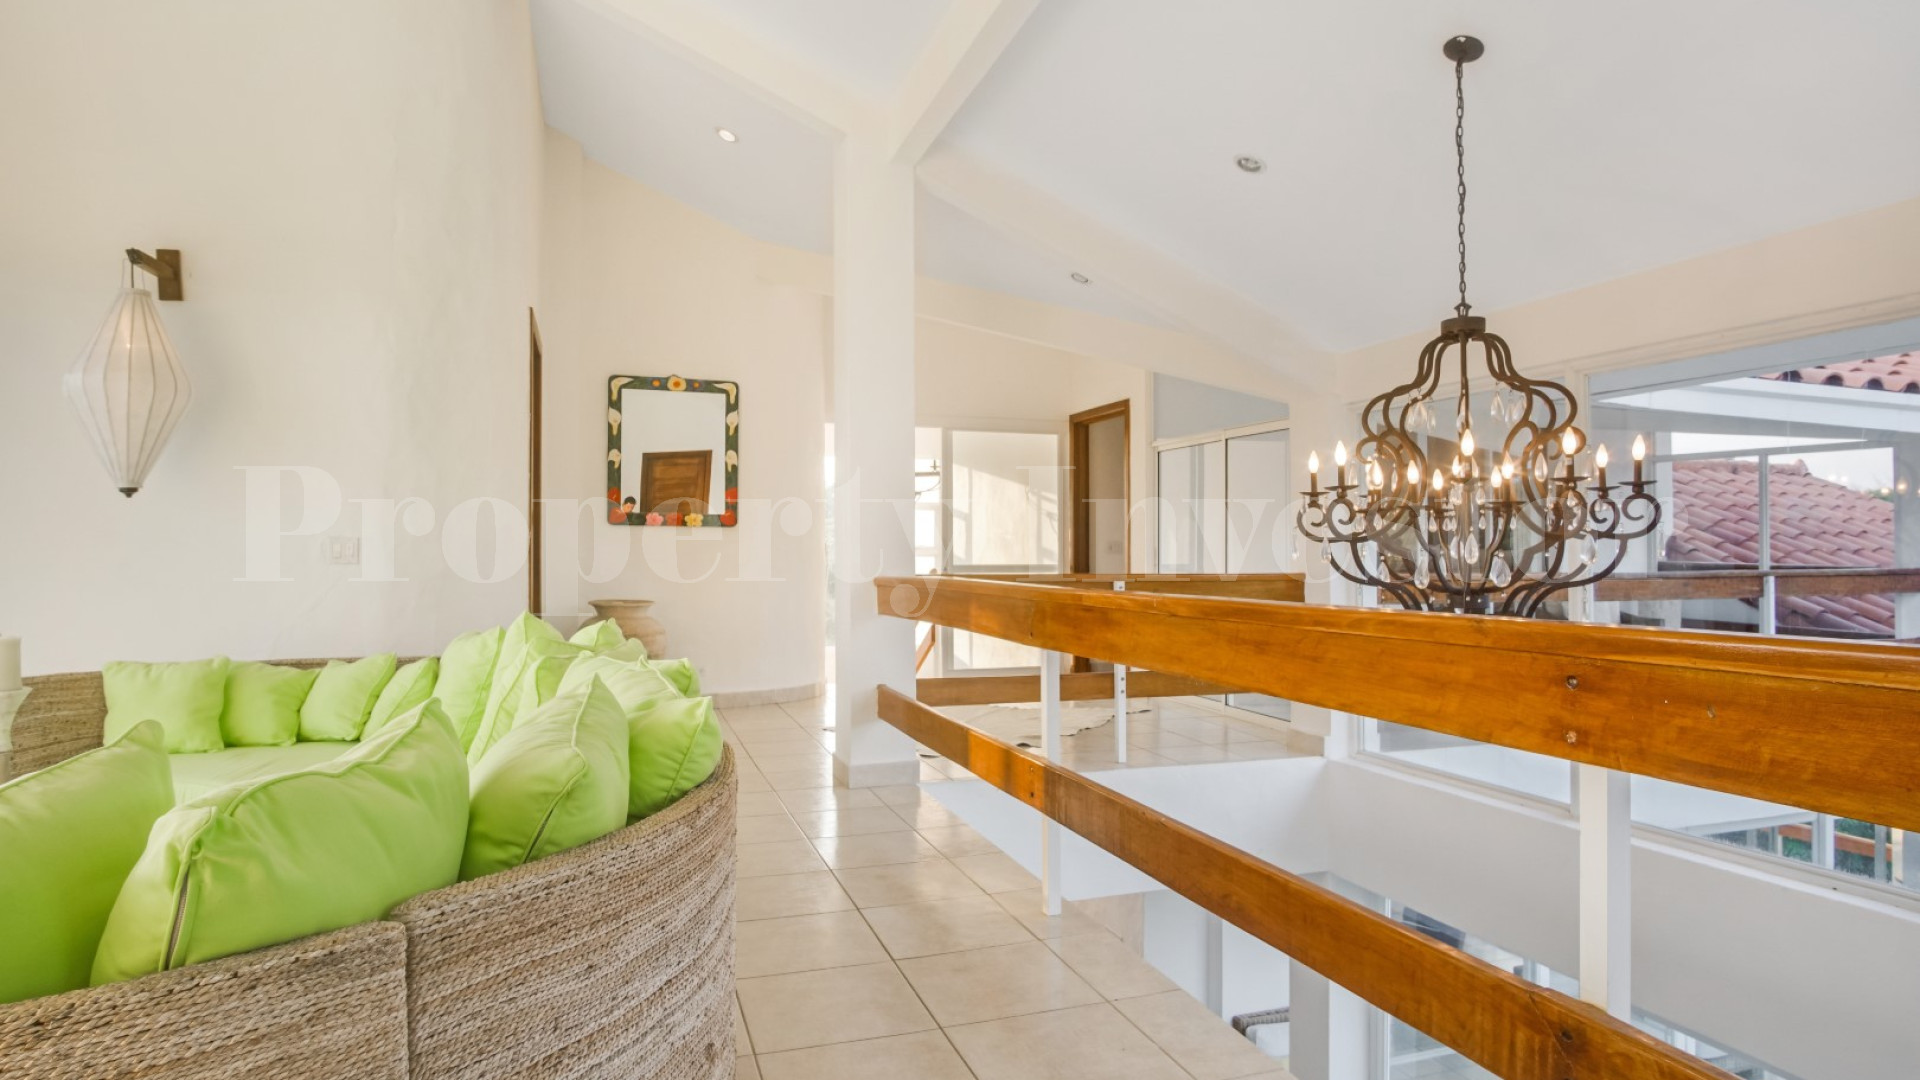 One-of-a-Kind 4 Bedroom Luxury Designer Villa for Sale in Punta Barco, Panama